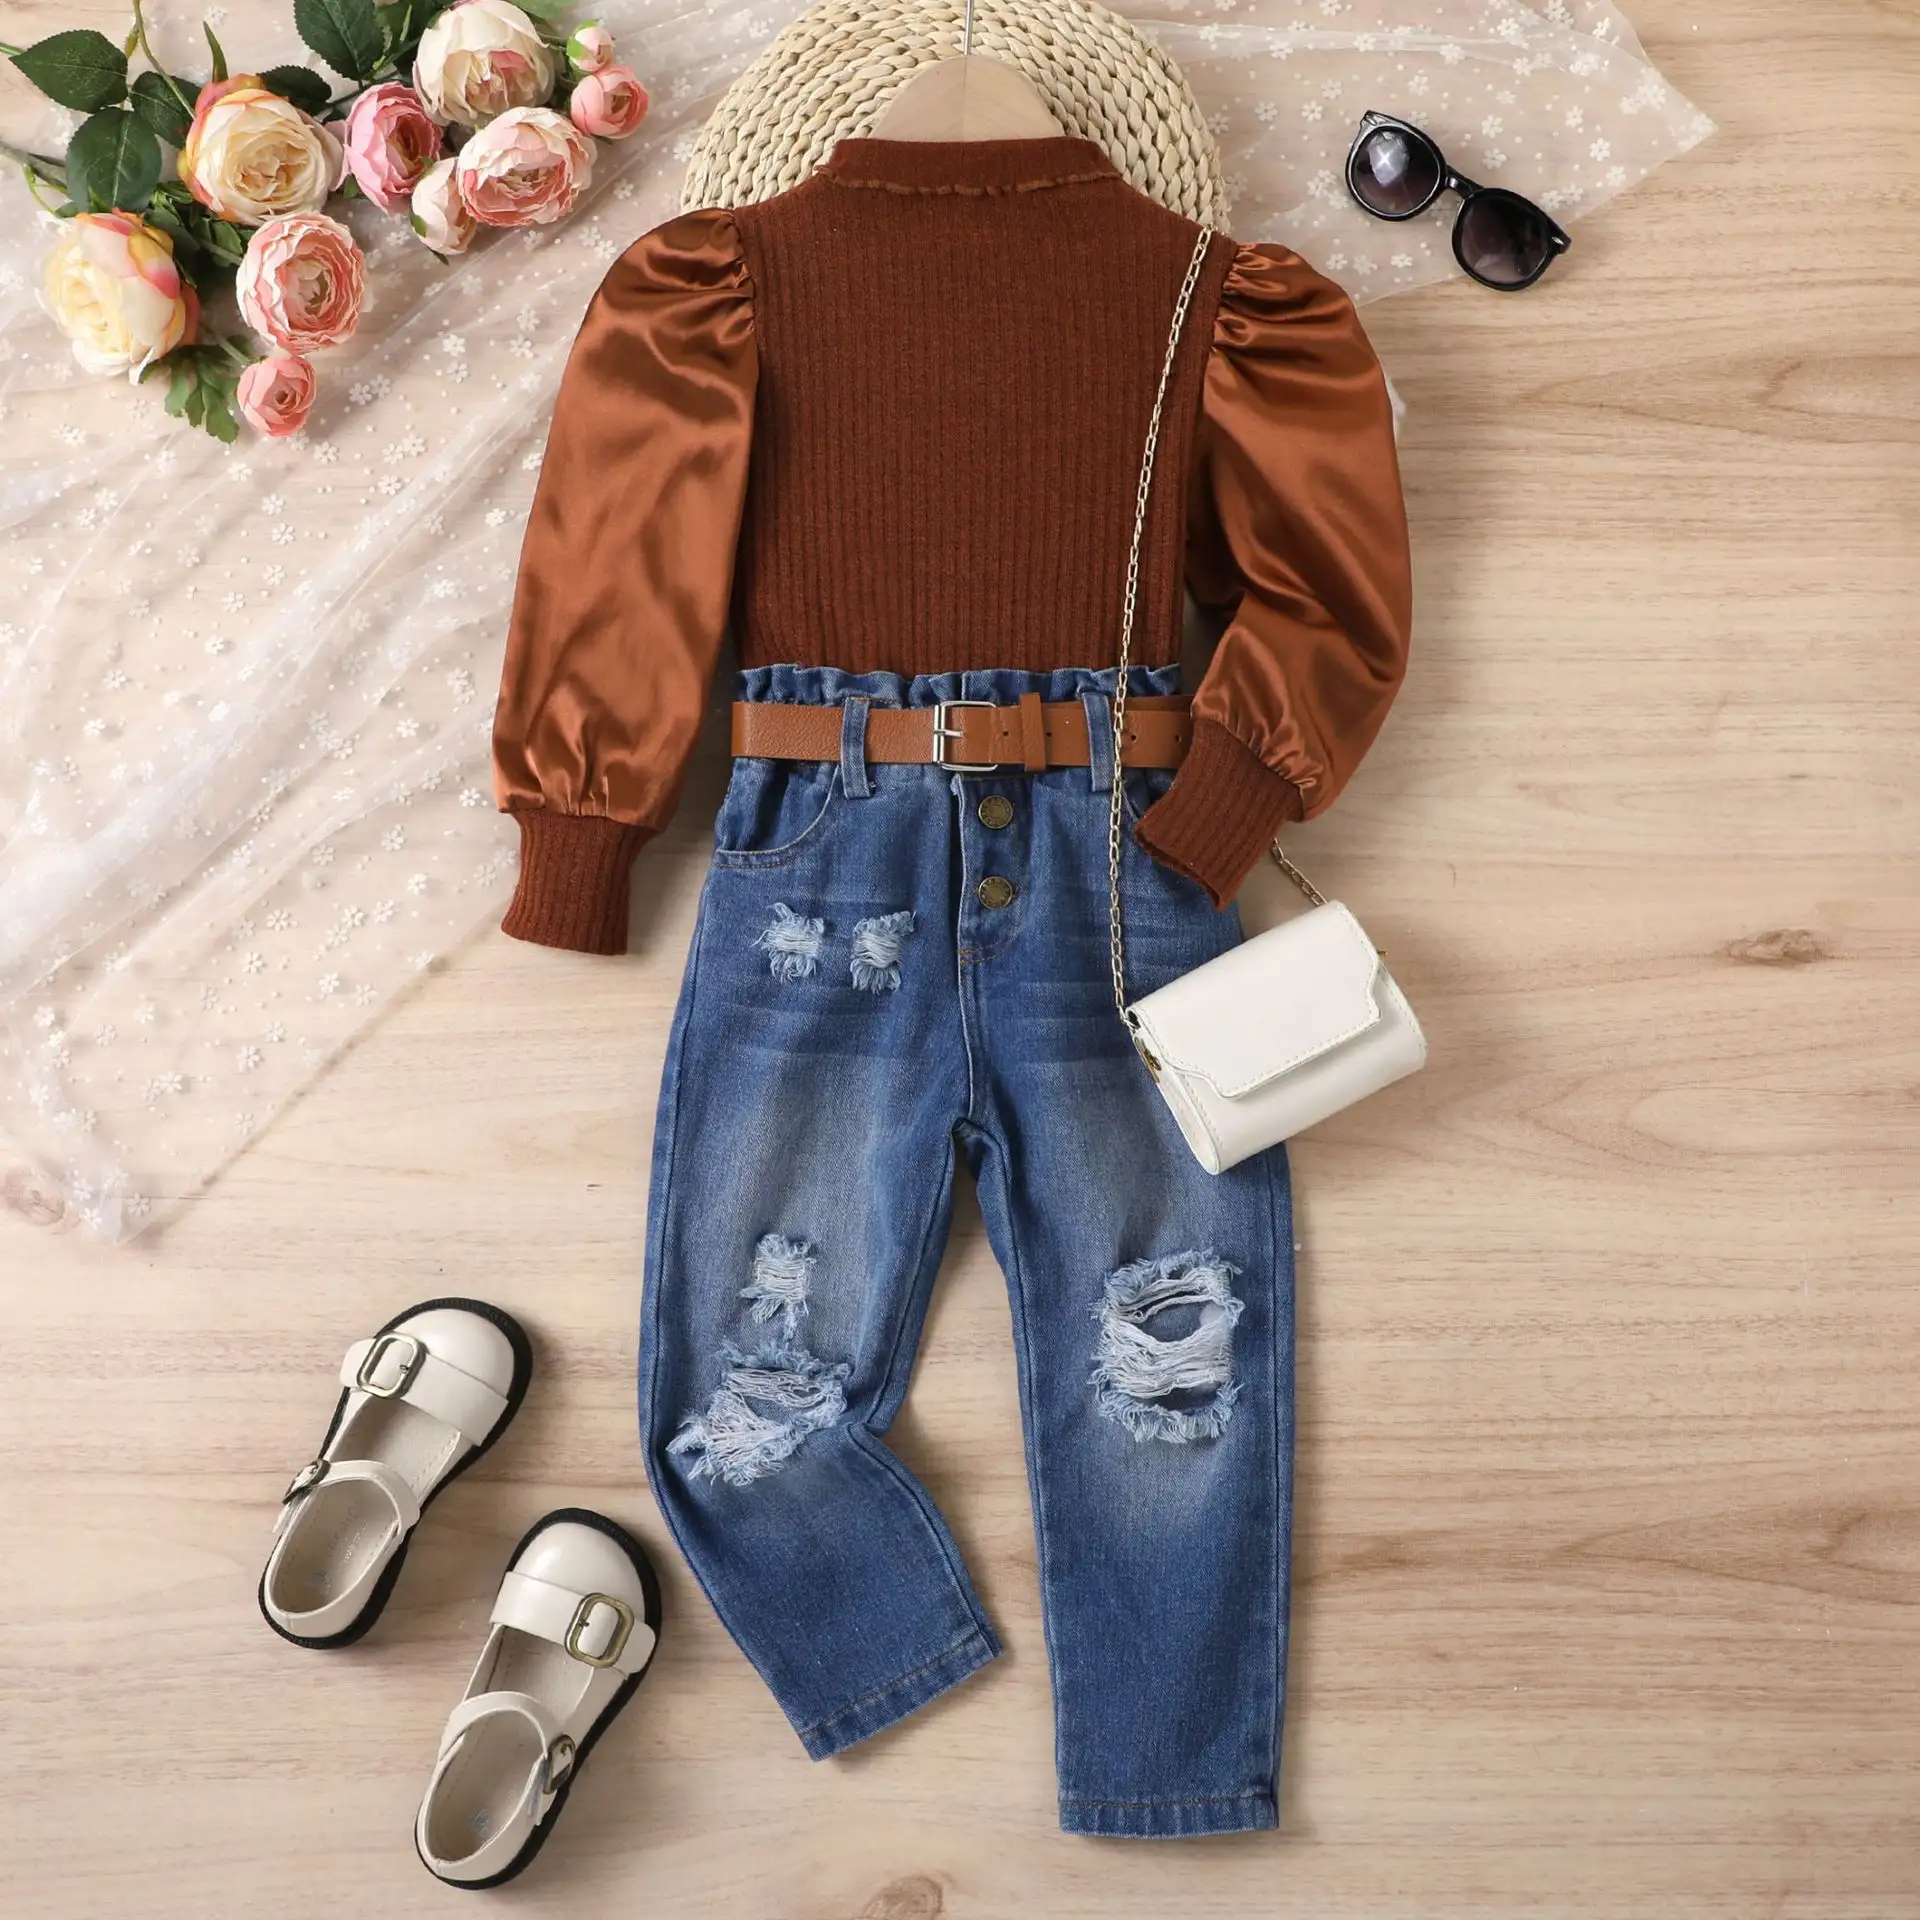 Autumn Fashion Children Cool Clothes Set Baby Girls Puff Sleeve Top + Ripped Jeans With Belts